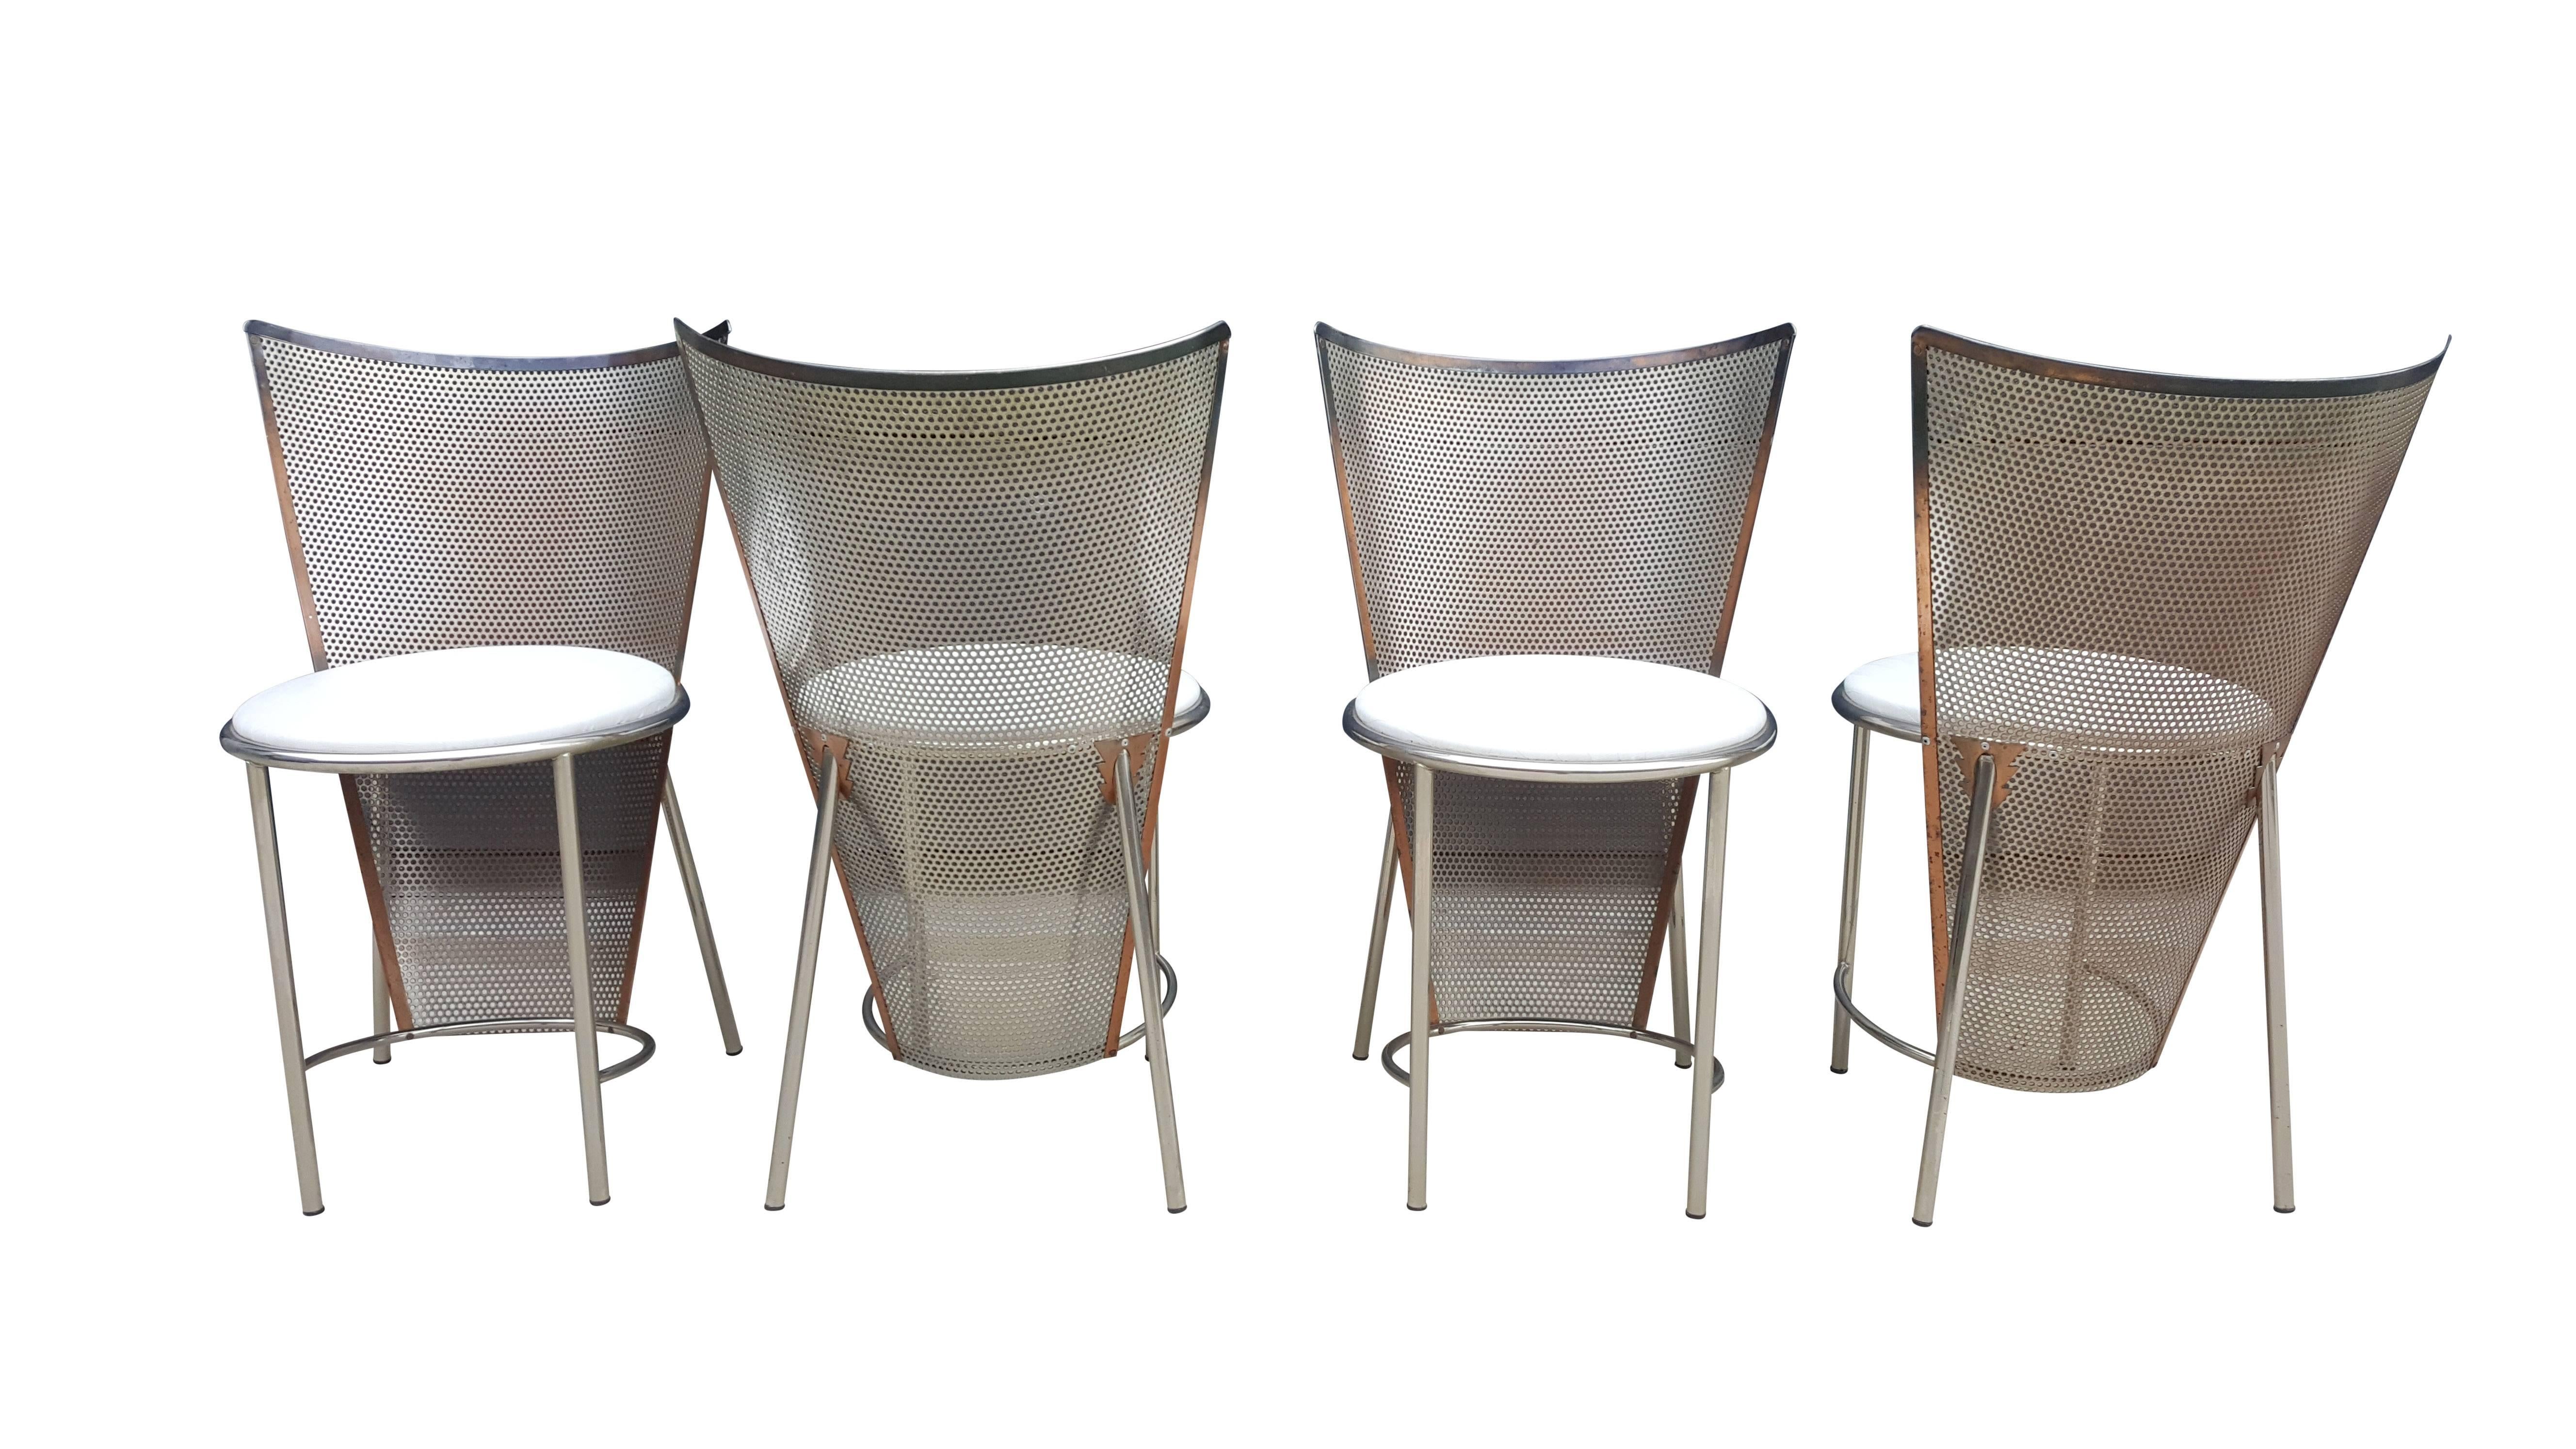 Set of four chairs exhibited at the Belgian Pavillion in the Sevilla '92 world expo.

The chairs are manufactured by Belgo Chrome.
Designed by Frans Van Praet.
Bronze patinated metal, brass, perforated brass back support.
White